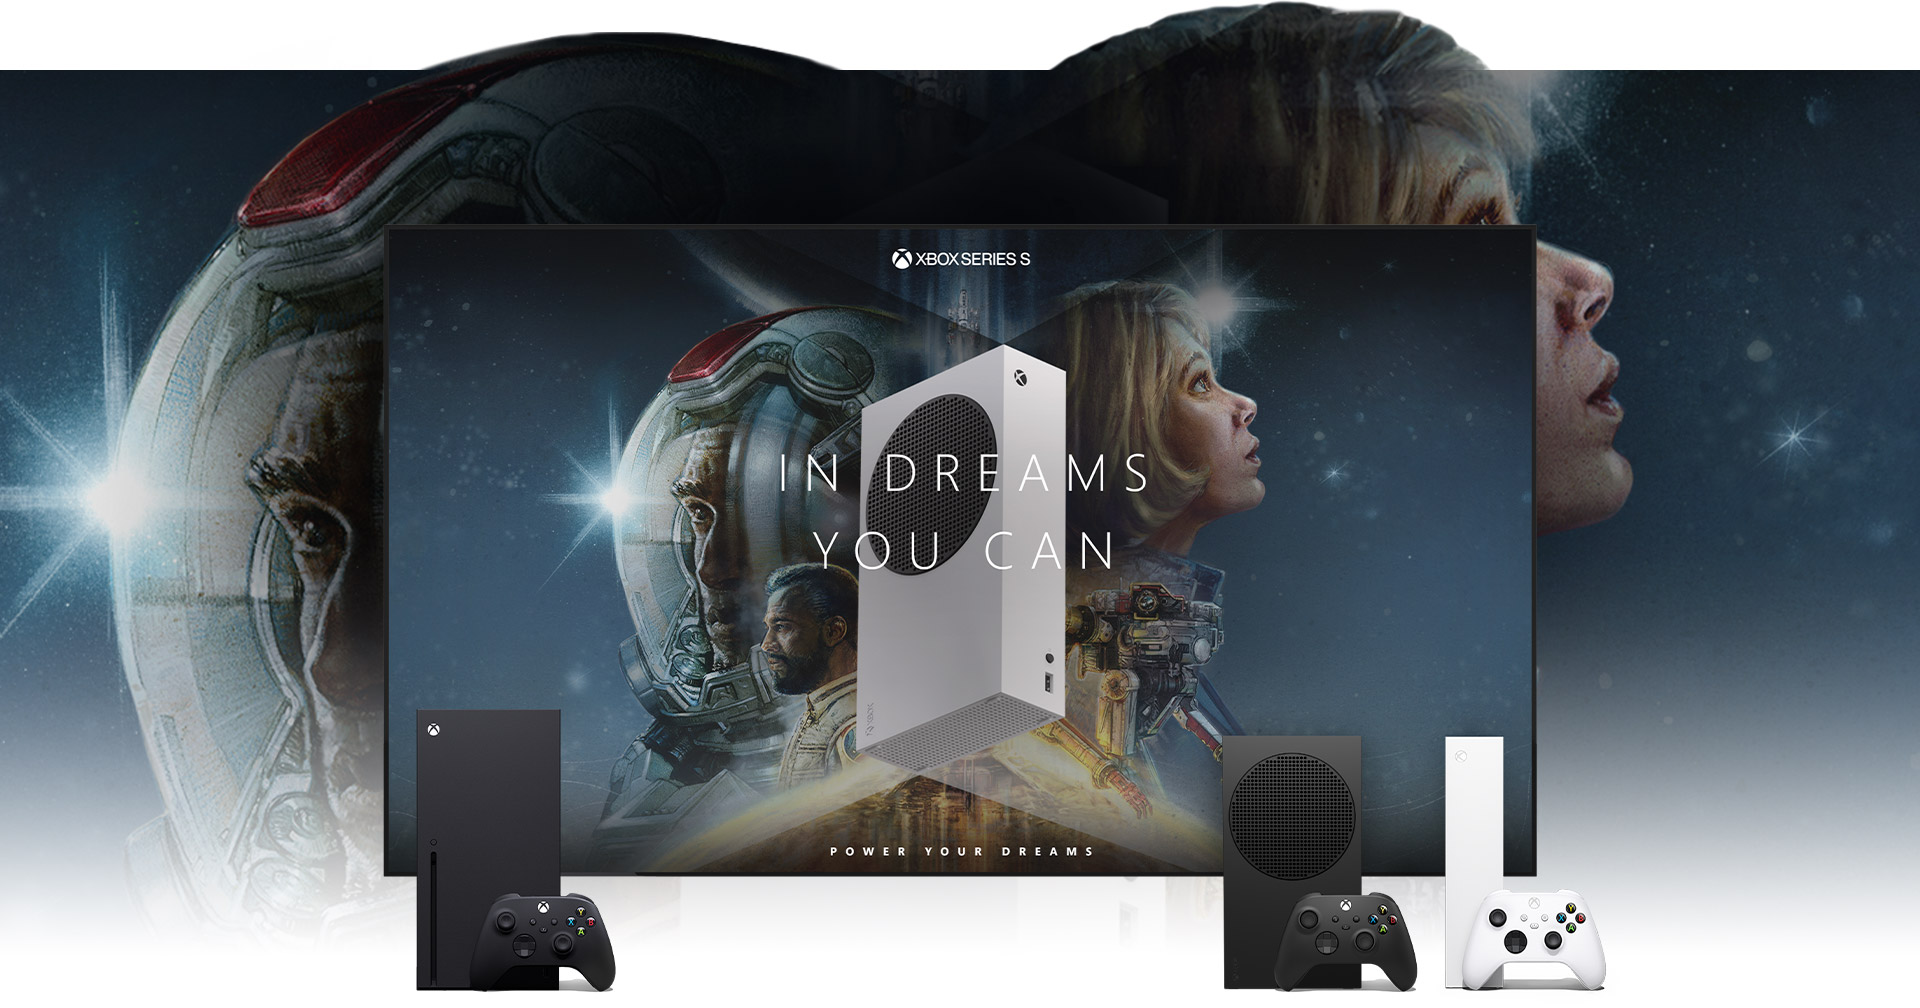 Xbox Series X|S next to a TV displaying Power your dreams Starfield Wallpaper